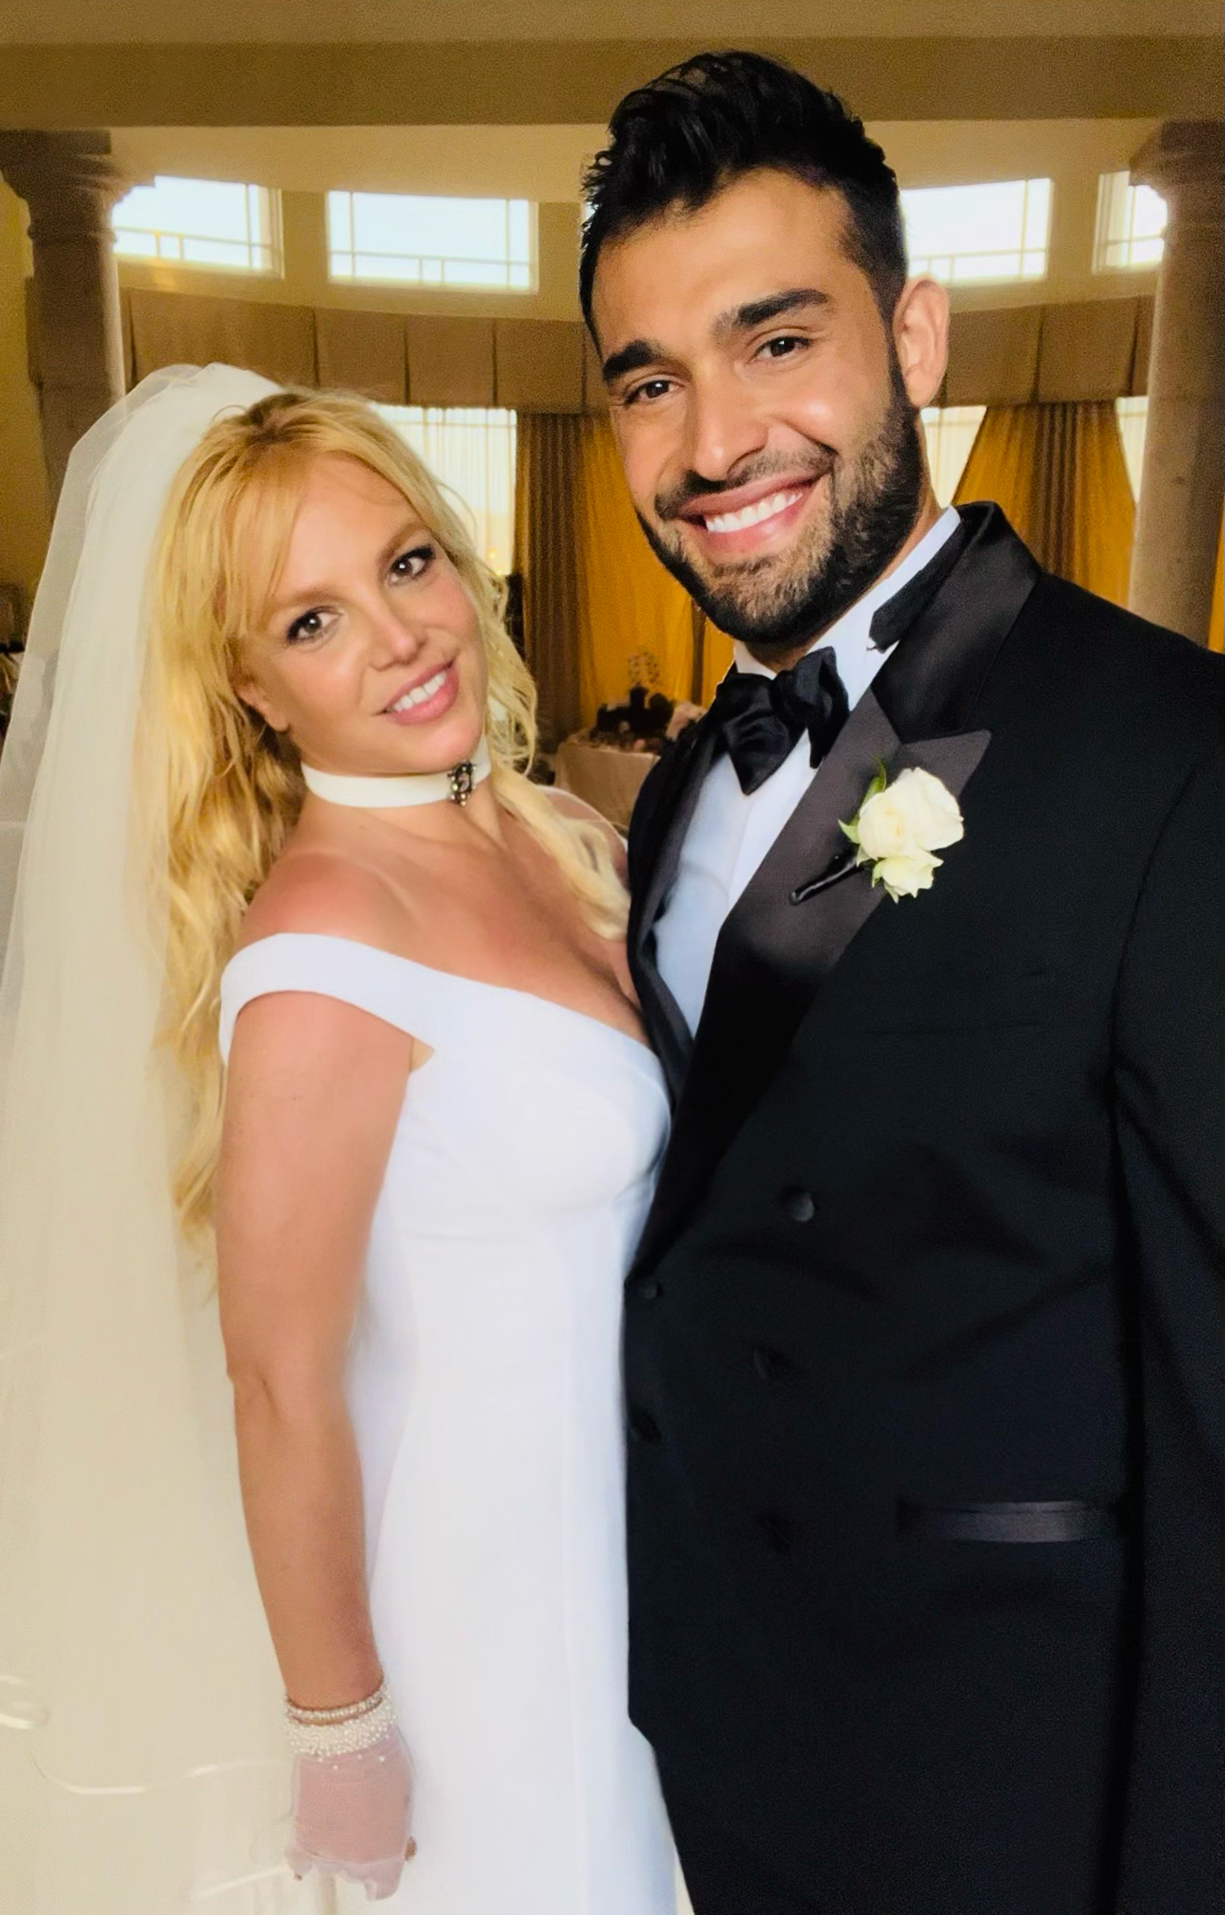 Britney Spears and Sam Asghari wed in California on June 9th